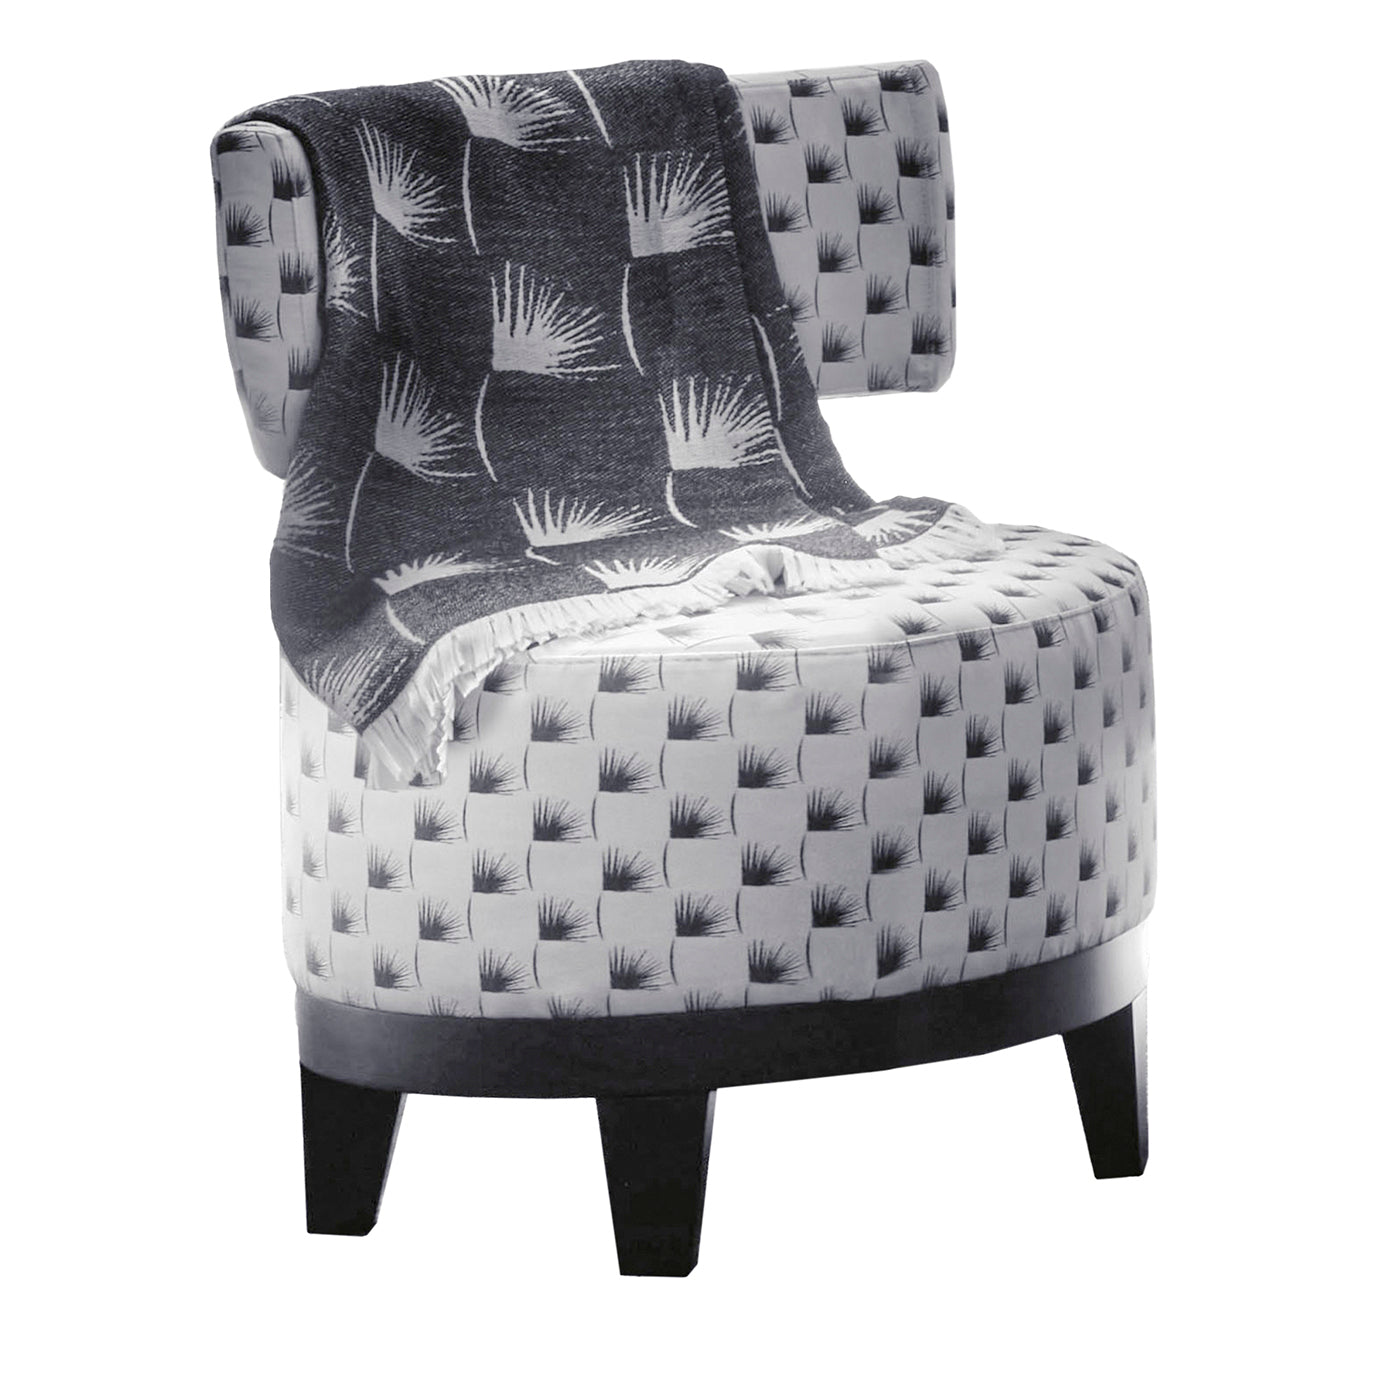 Charles K Black and White Lounge Chair - Main view